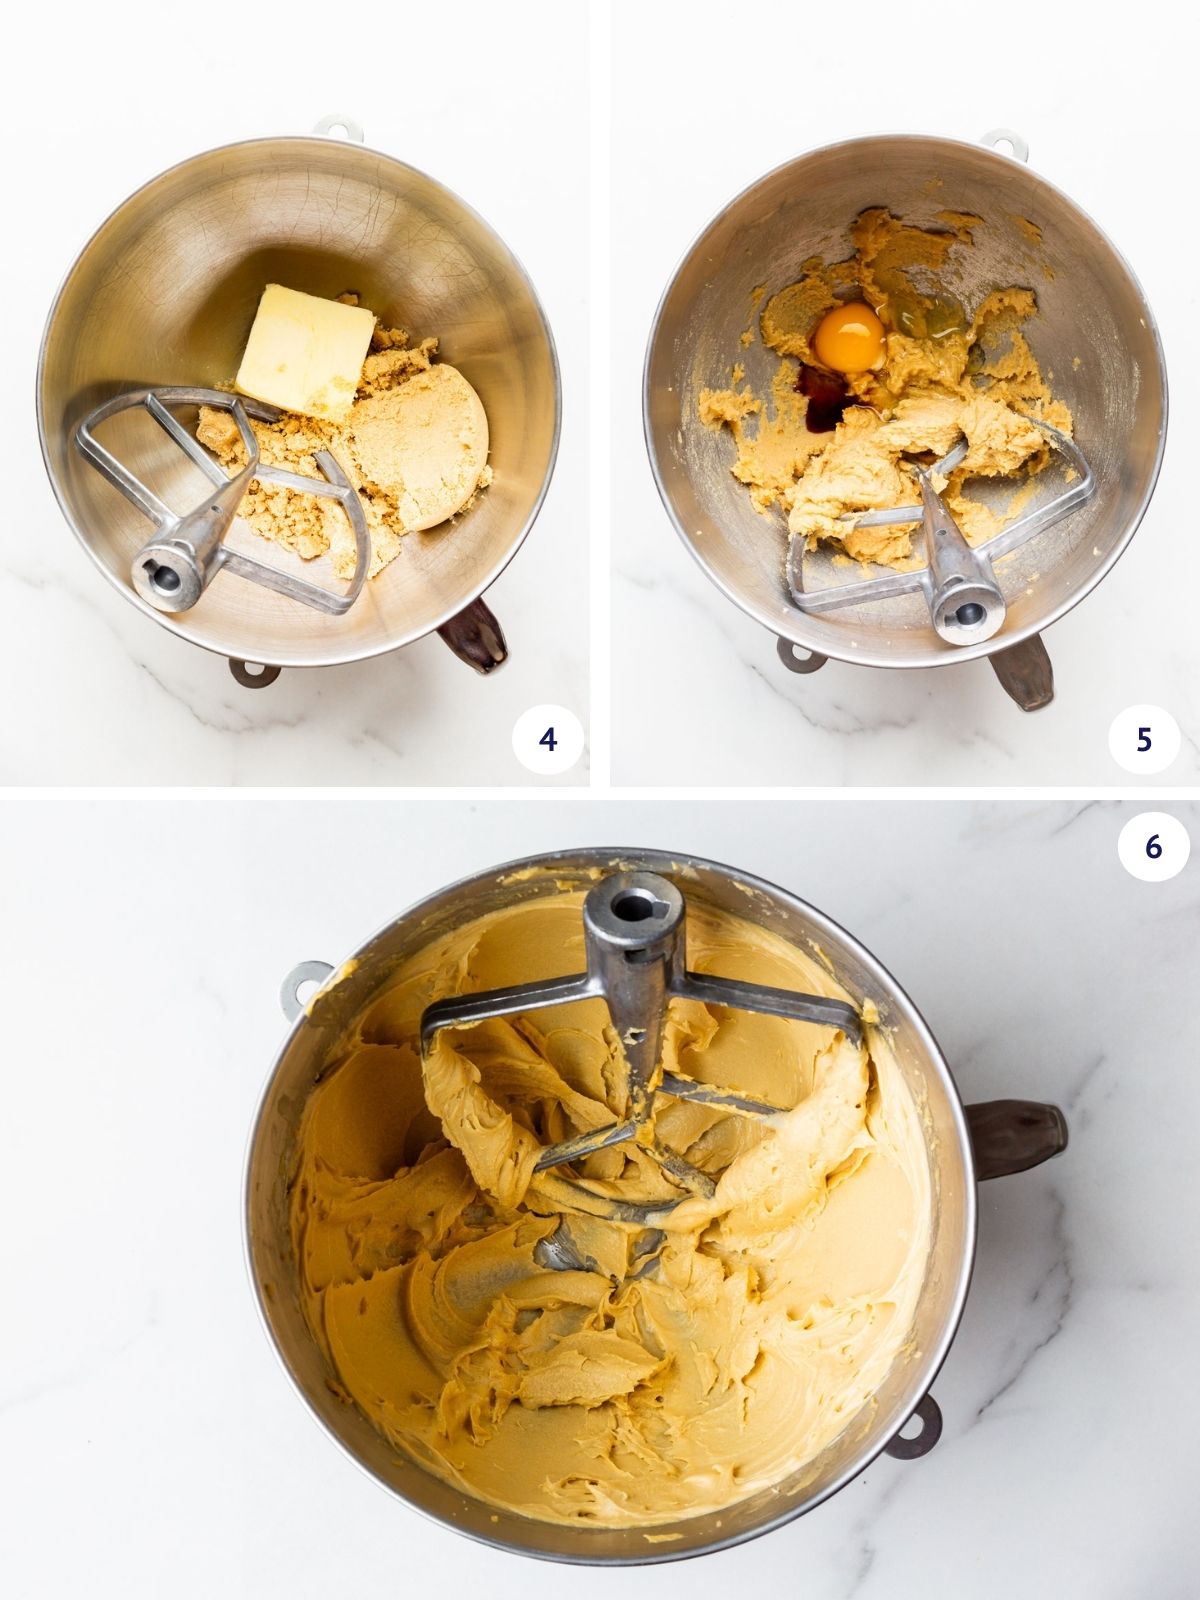 Creaming butter and sugar then adding eggs one at a time with vanilla to create a fluffy, airy base for a coffee cake.